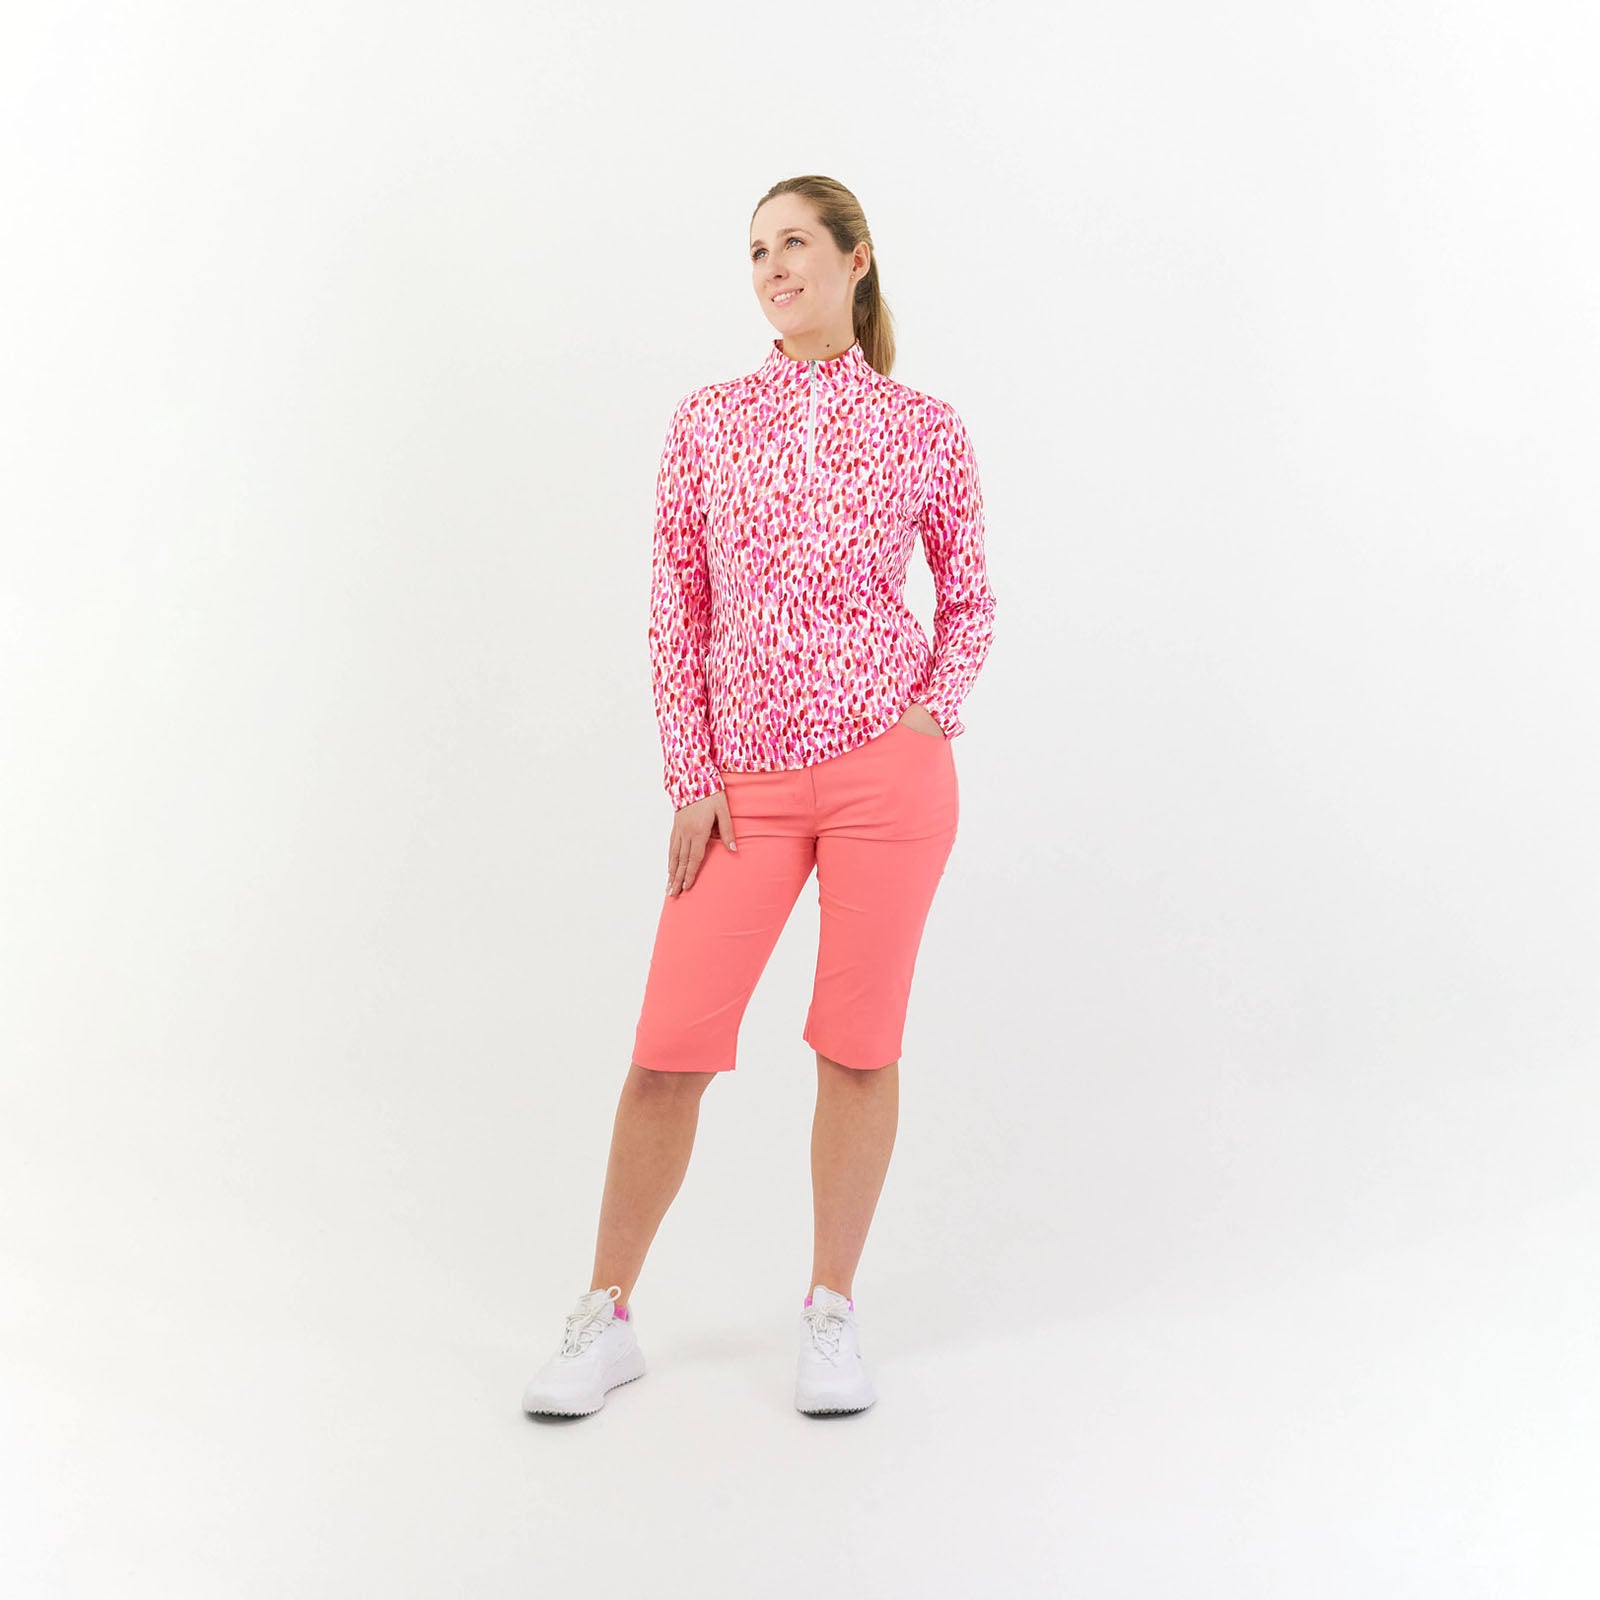 Pure Golf Ladies Long Sleeve Top in Petal Polka Print with Sun Protection